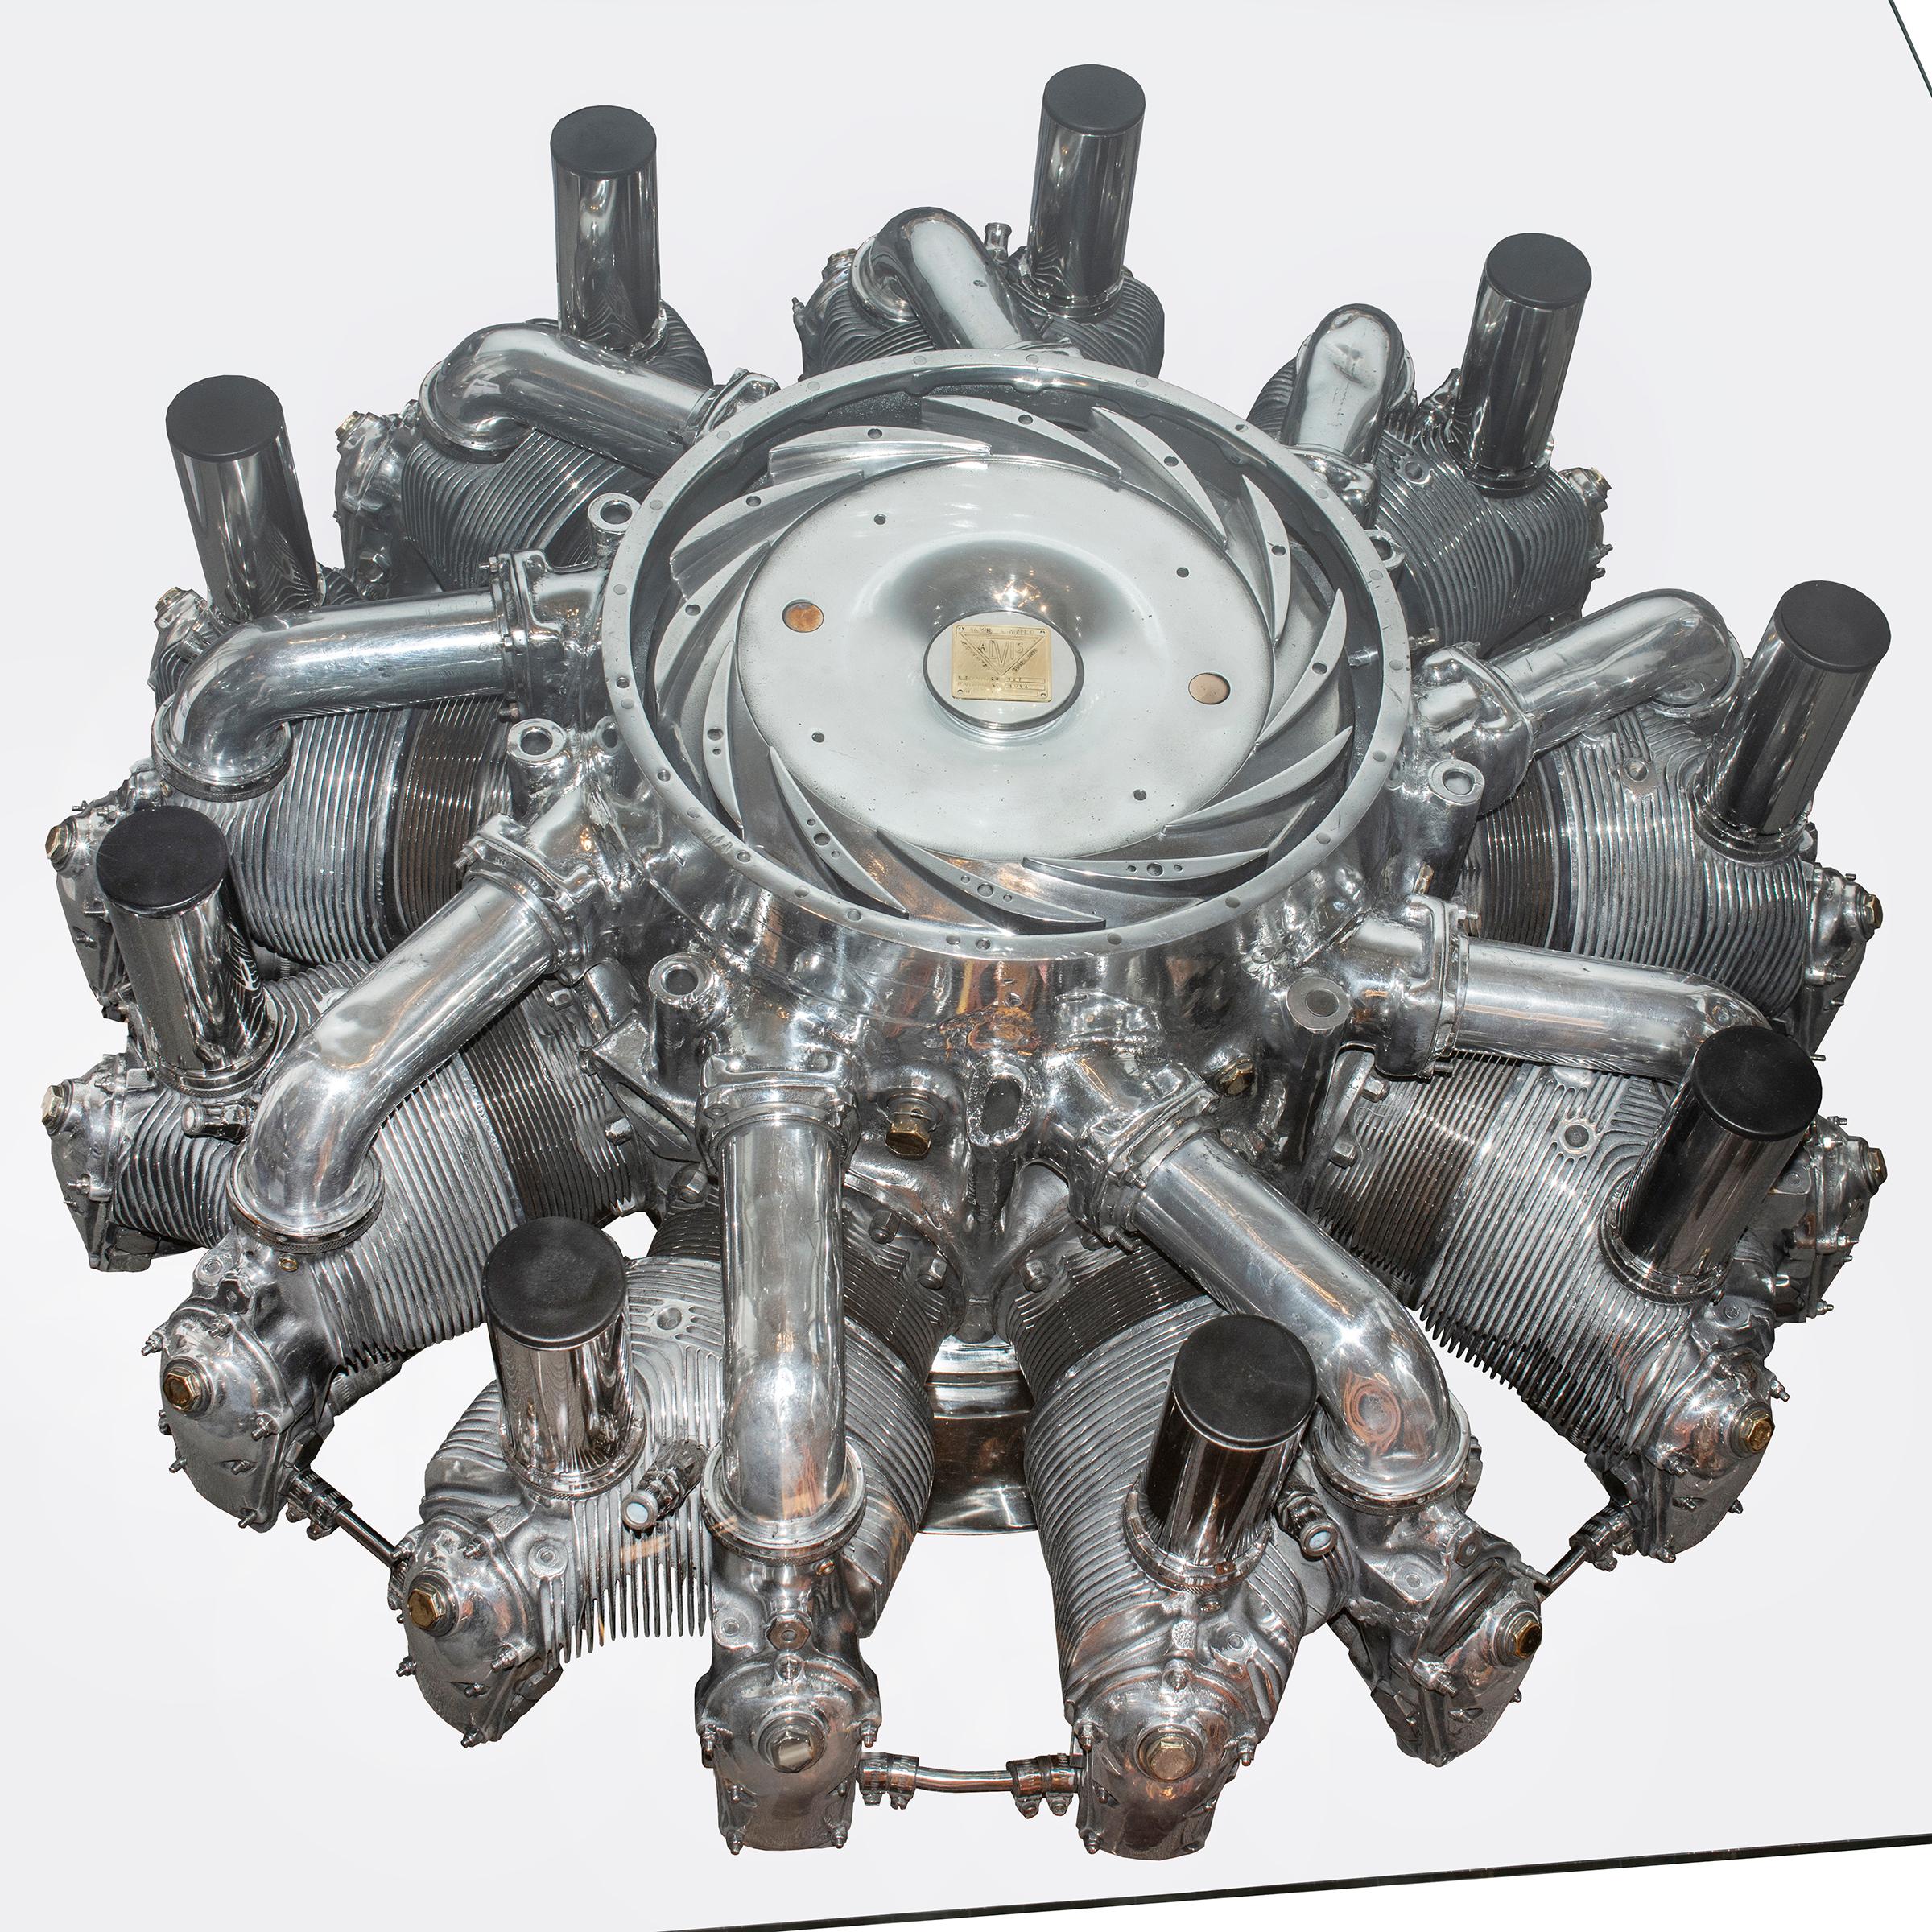 Coffee table aircraft engine Alvis Leonides, made with the
original British air-cooled nine-cylinder radial aero engine
which was first developed by Alvis Car and Engineering
Company in 1936. The engine was made for Hunting Percival
Pembroke